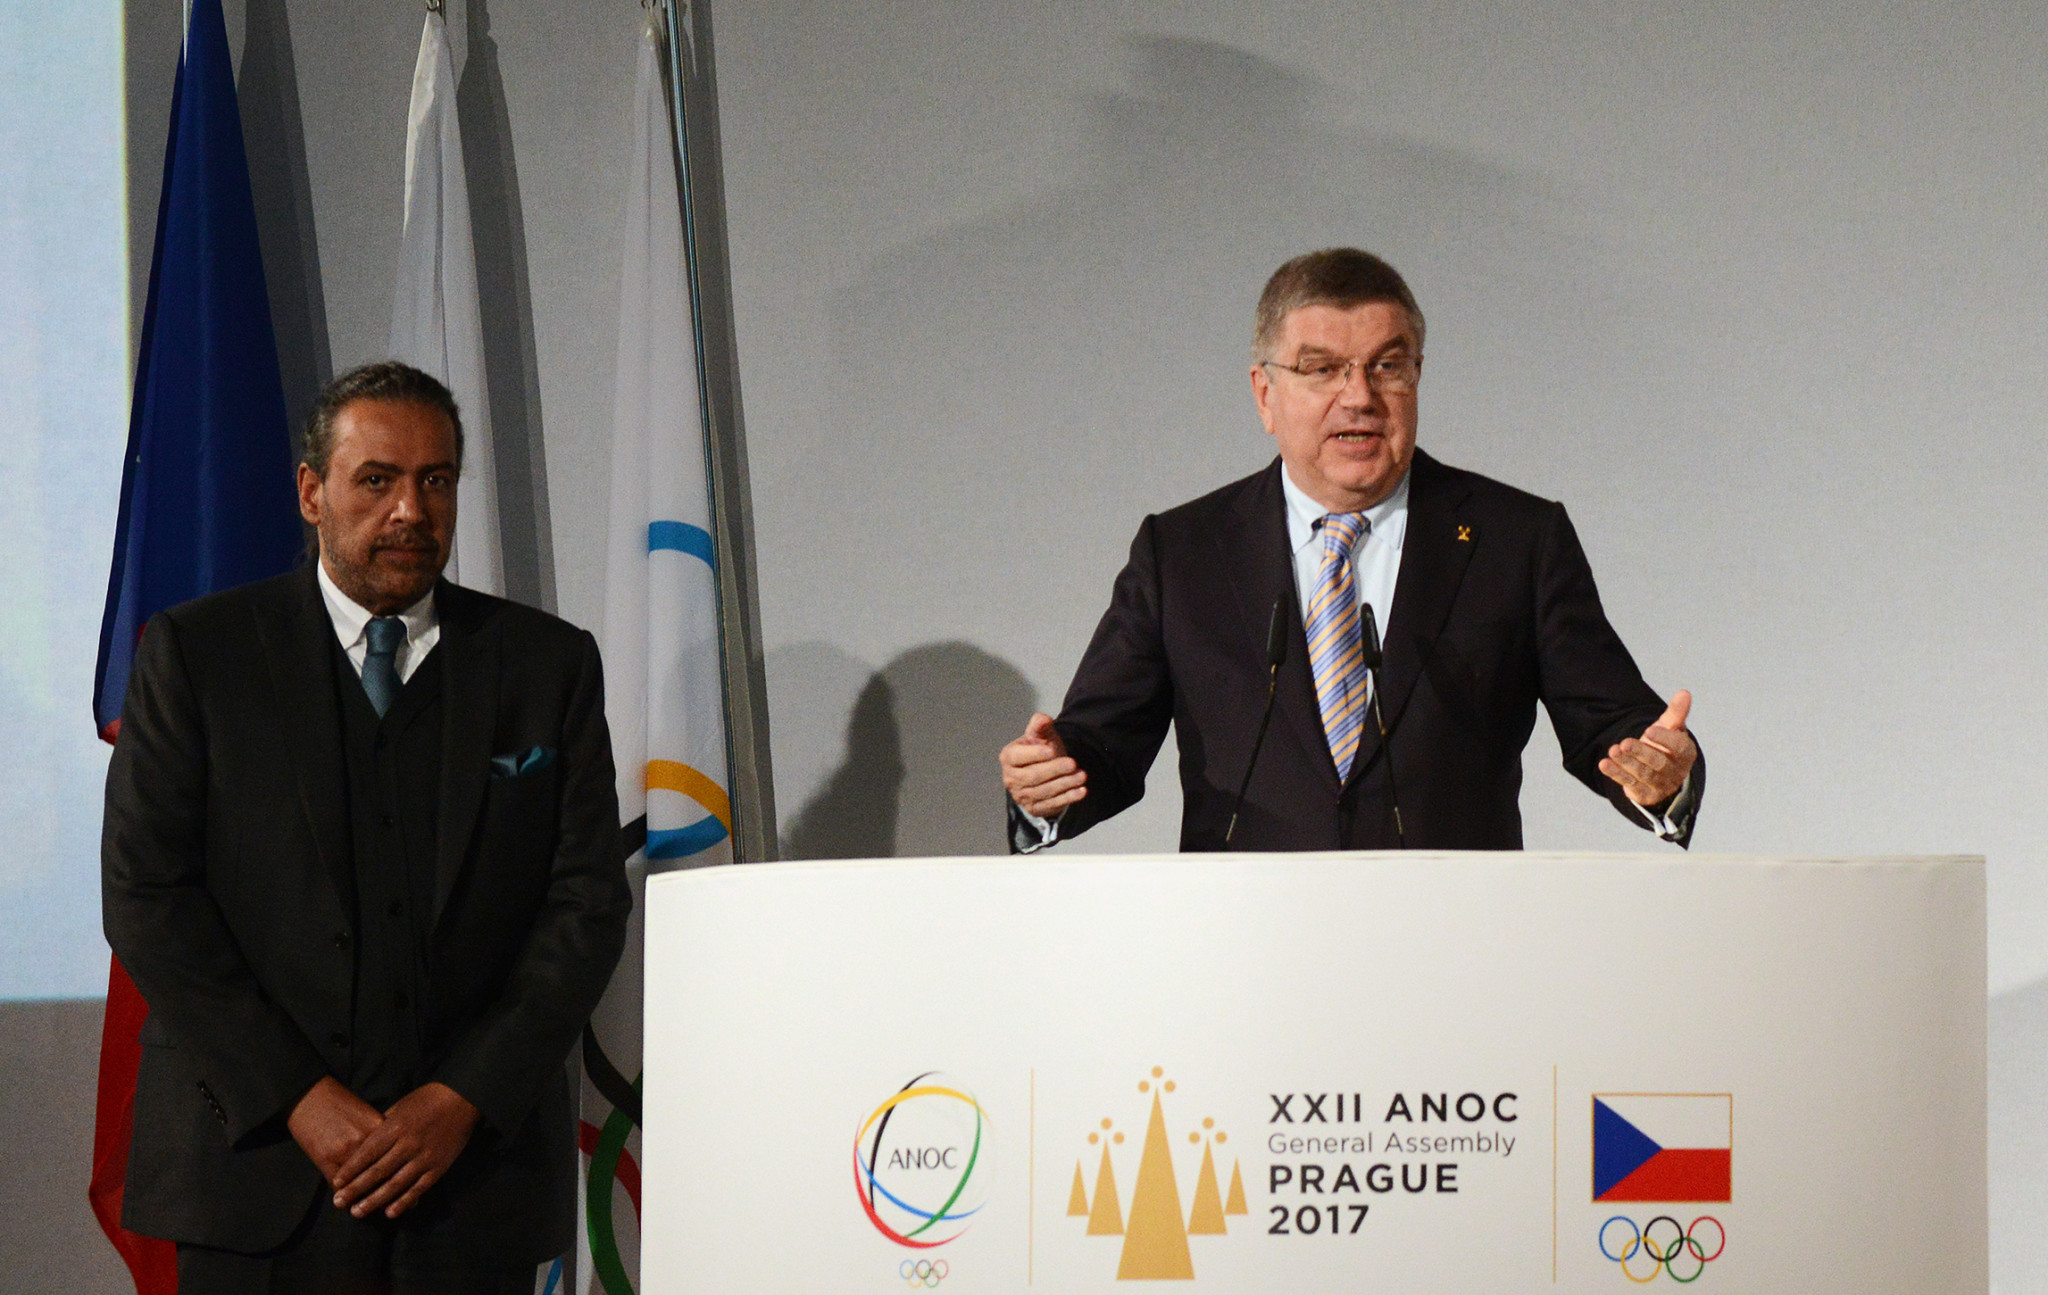 Sheikh Ahmad, left, pictured alongside IOC President Thomas Bach during the General Assembly today ©Getty Images